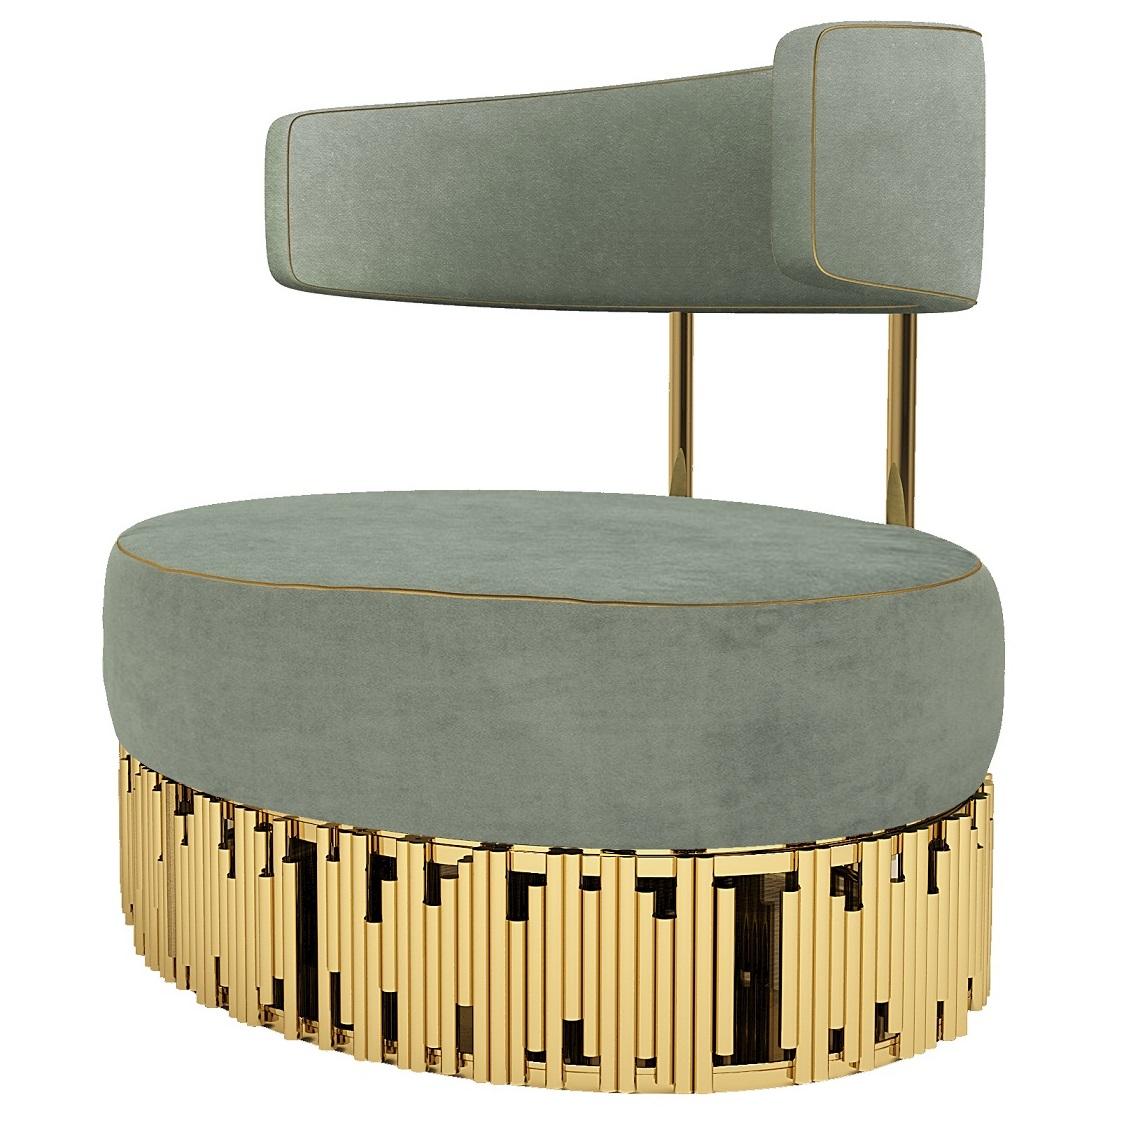 The armchair features gold piping and golden strips base with contemporary silhouette. 
Materials:
Upholstery : Aqua Velvet and Gold Piping
Legs : Polished Brass Finish
Contact us to enquire about COM/COL production, requirements and material